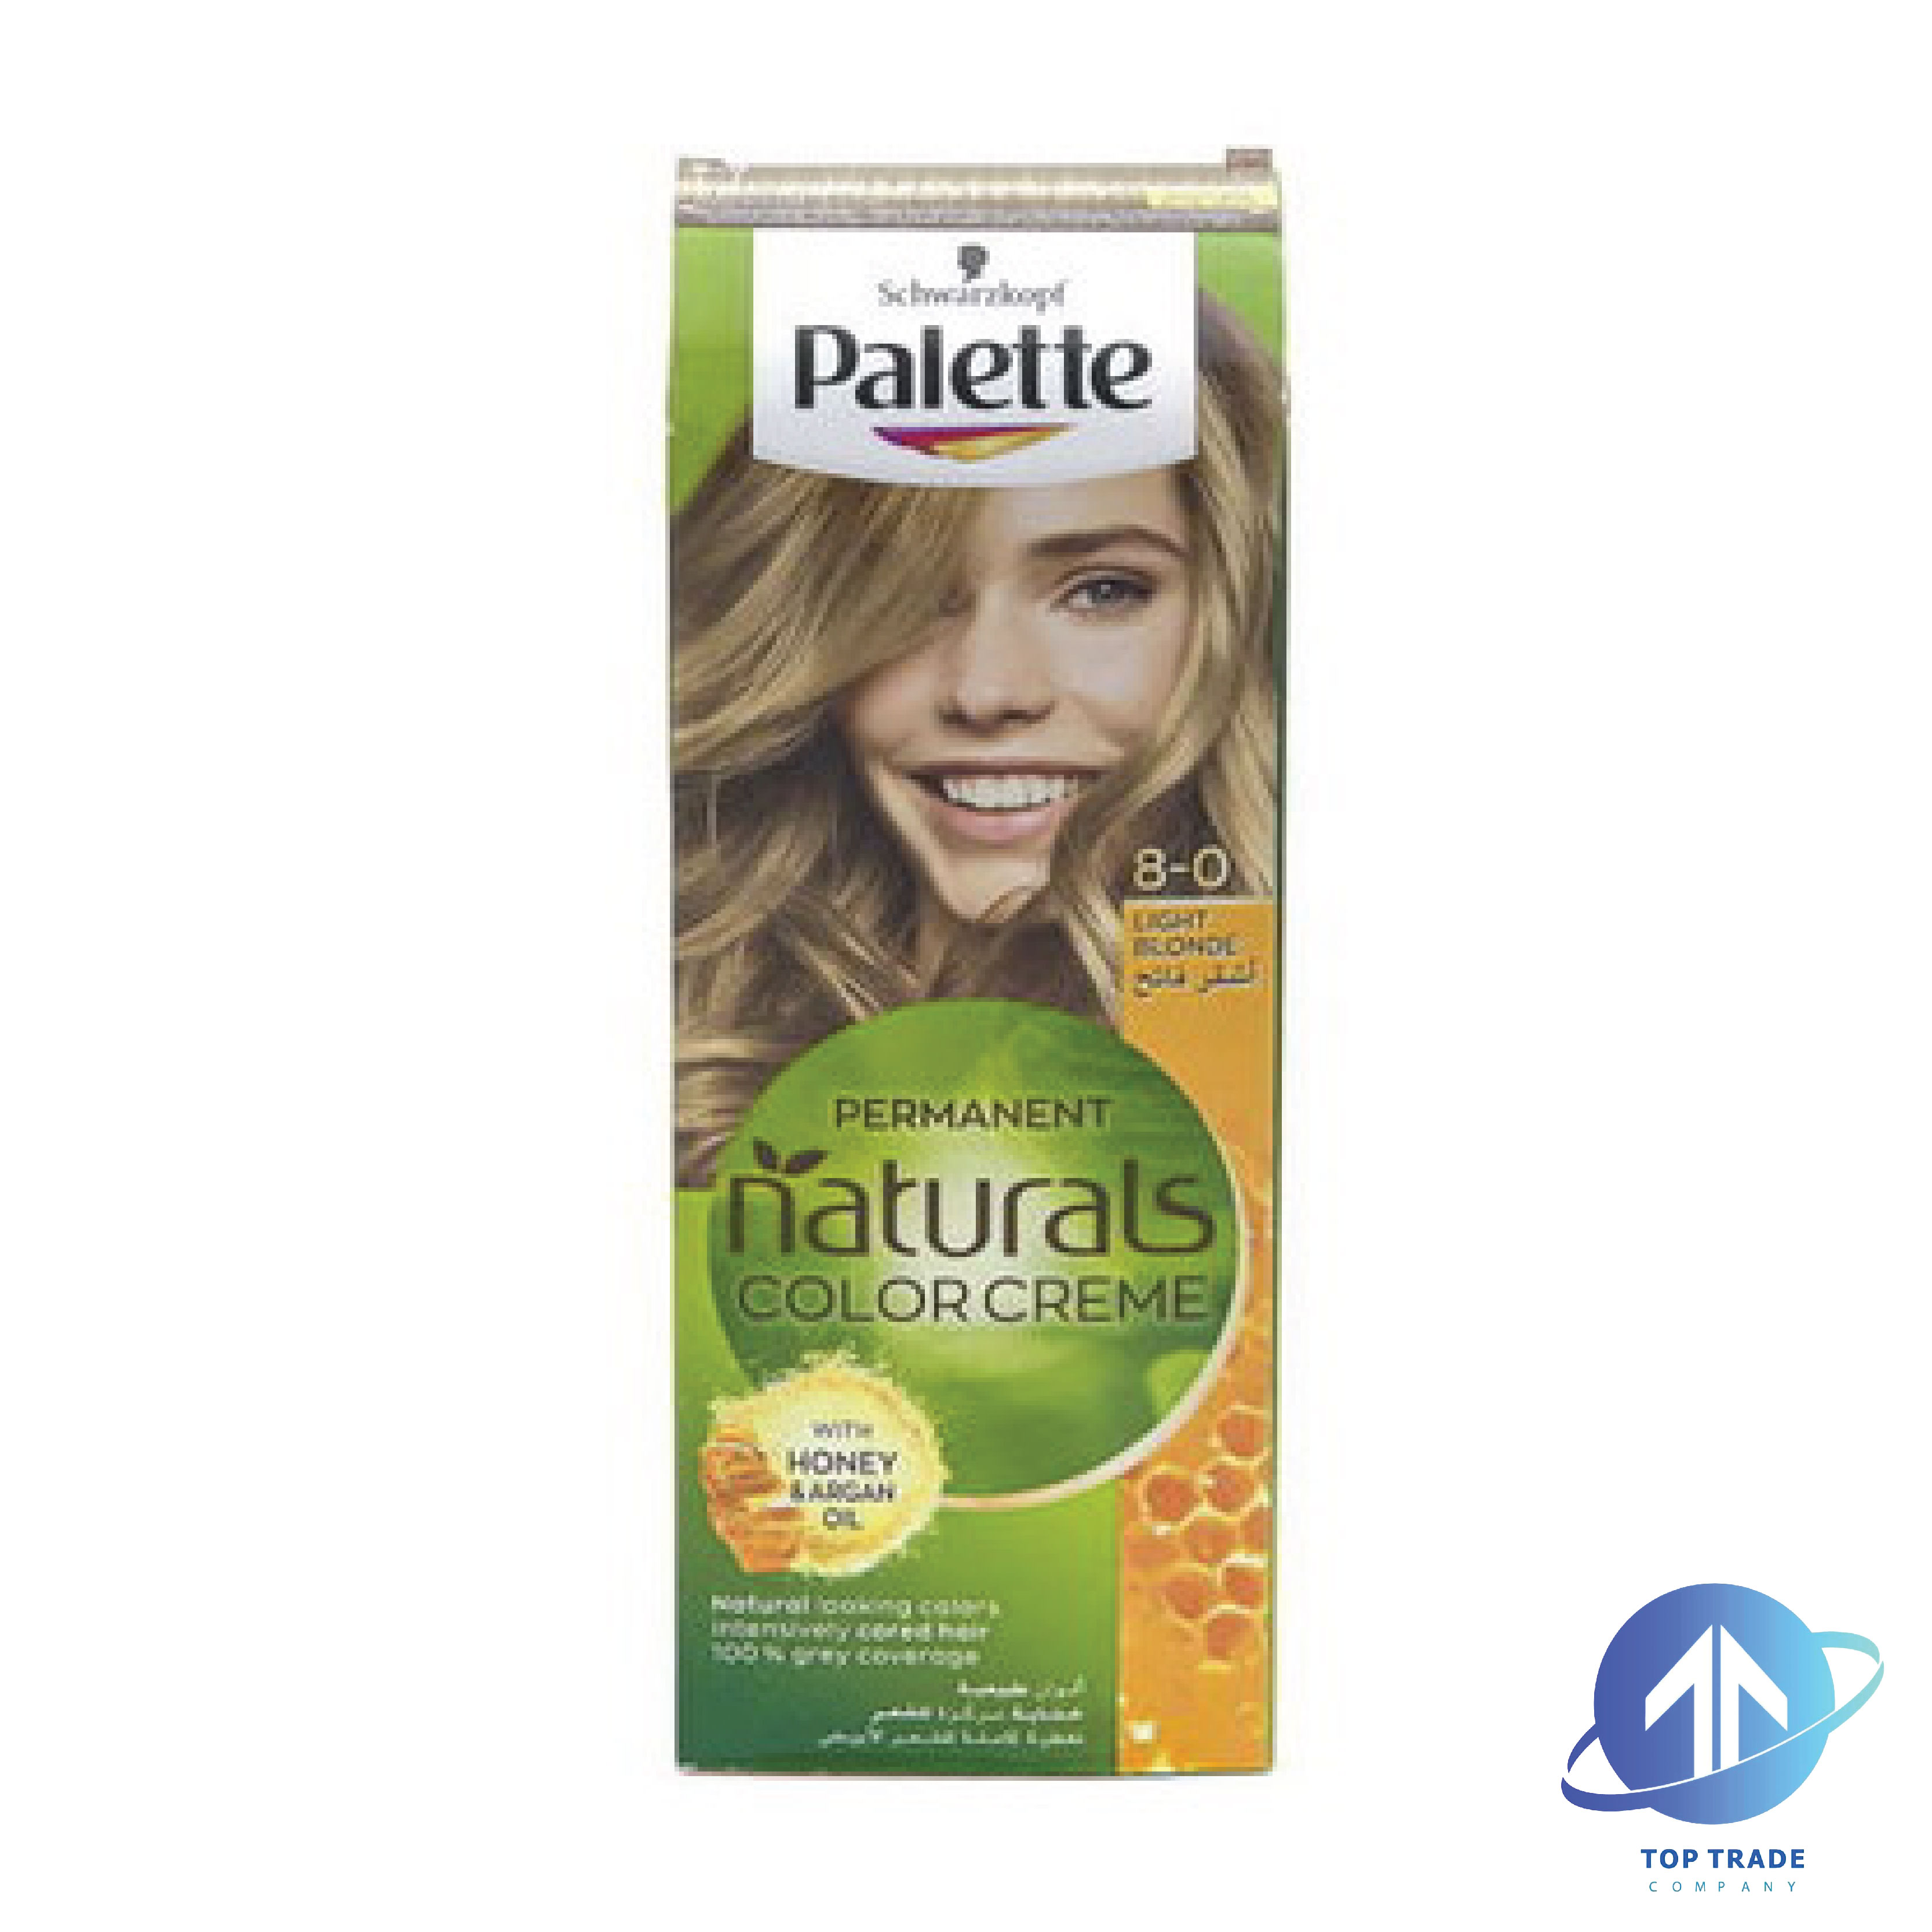 Palette hair coloring with argon oil hair color 8-0 light blonde